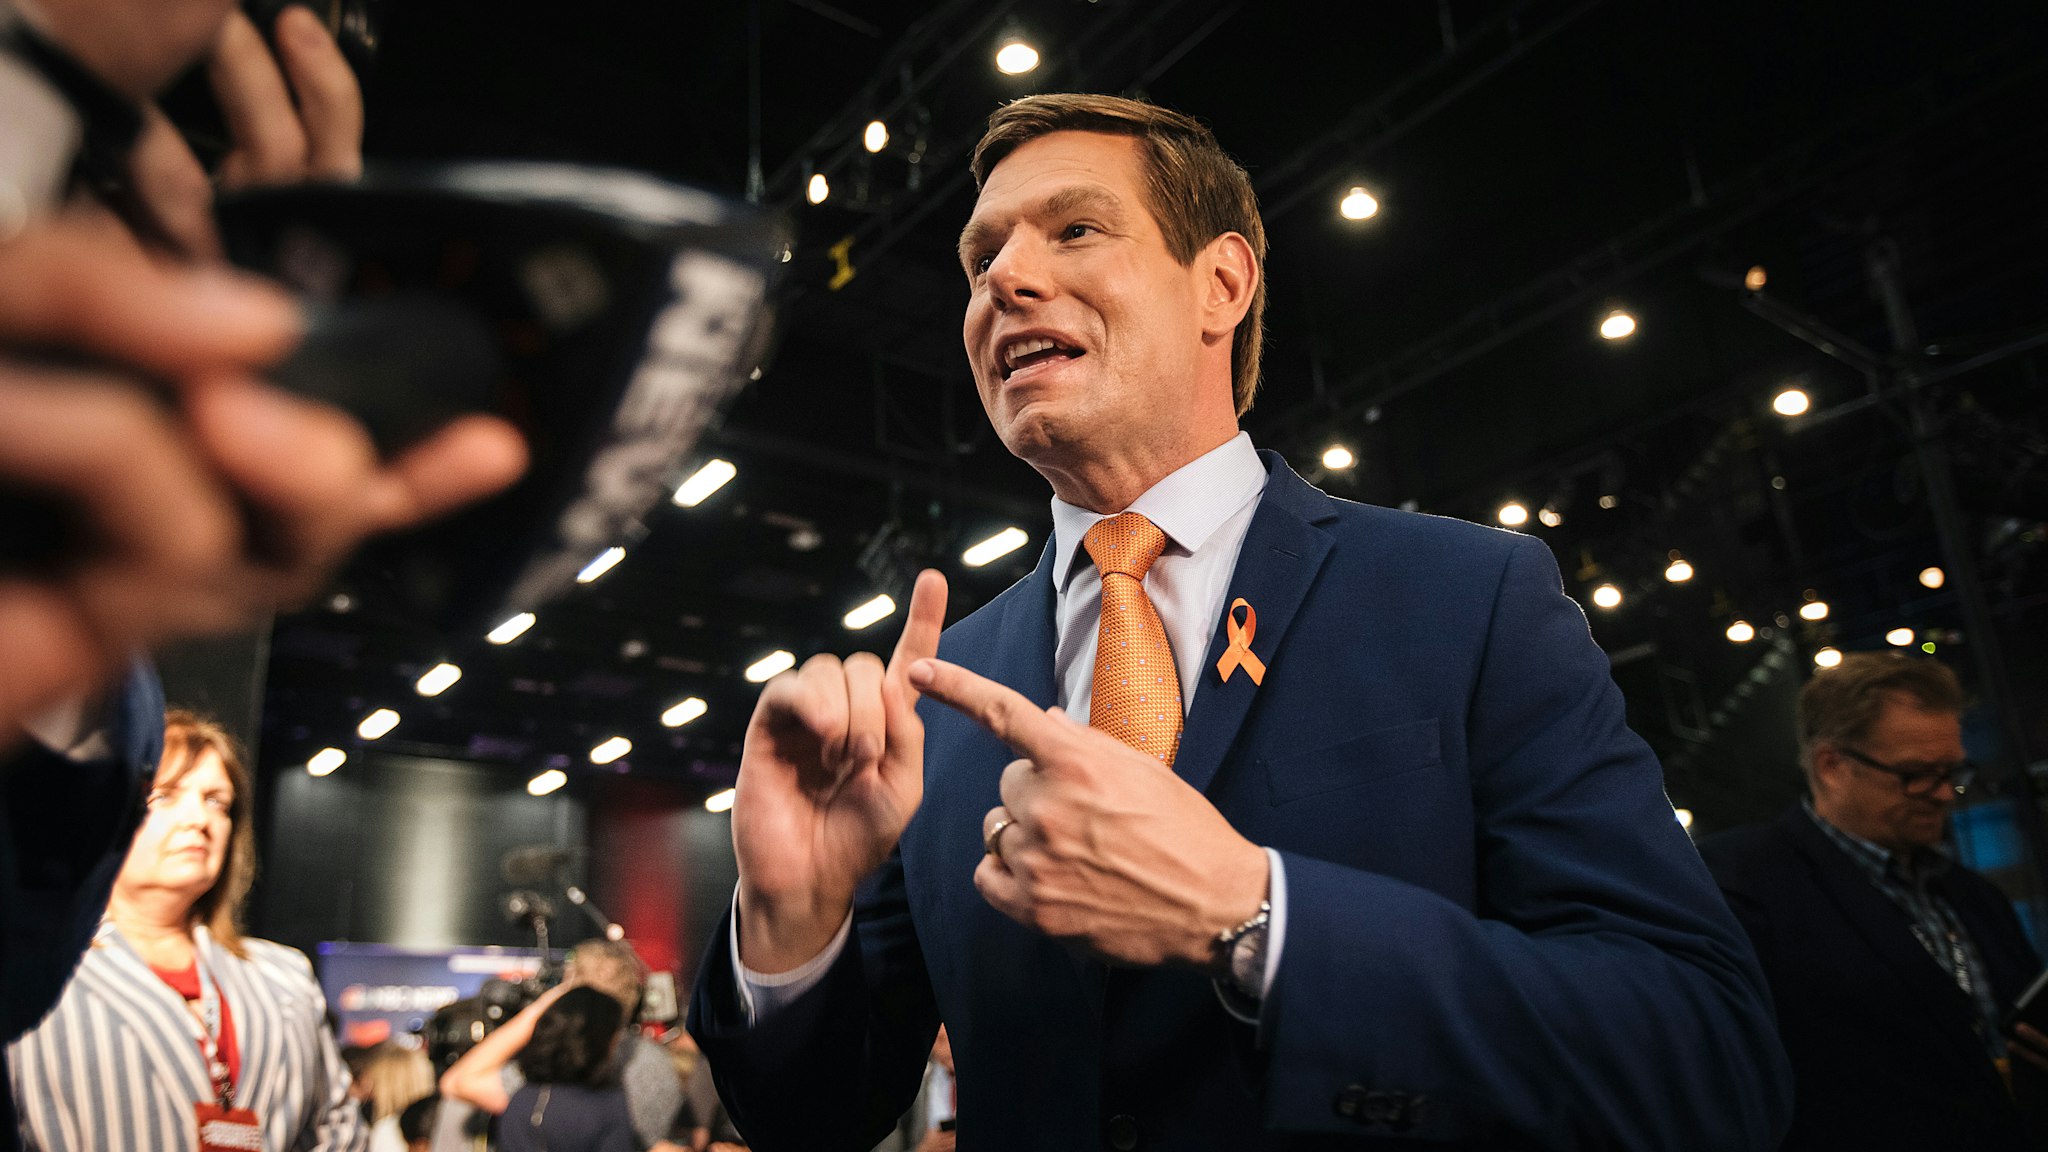 Representative Eric Swalwell, a Democrat from California and 2020 presidential candidate, speaks to the media following the Democratic presidential candidate debate in Miami, Florida, U.S., on Thursday, June 27, 2019. The candidates running for the Democratic presidential nomination rallied around the idea of a government-run Medicare option Thursday night, disagreeing only over whether to make it an option or put all Americans in the program.